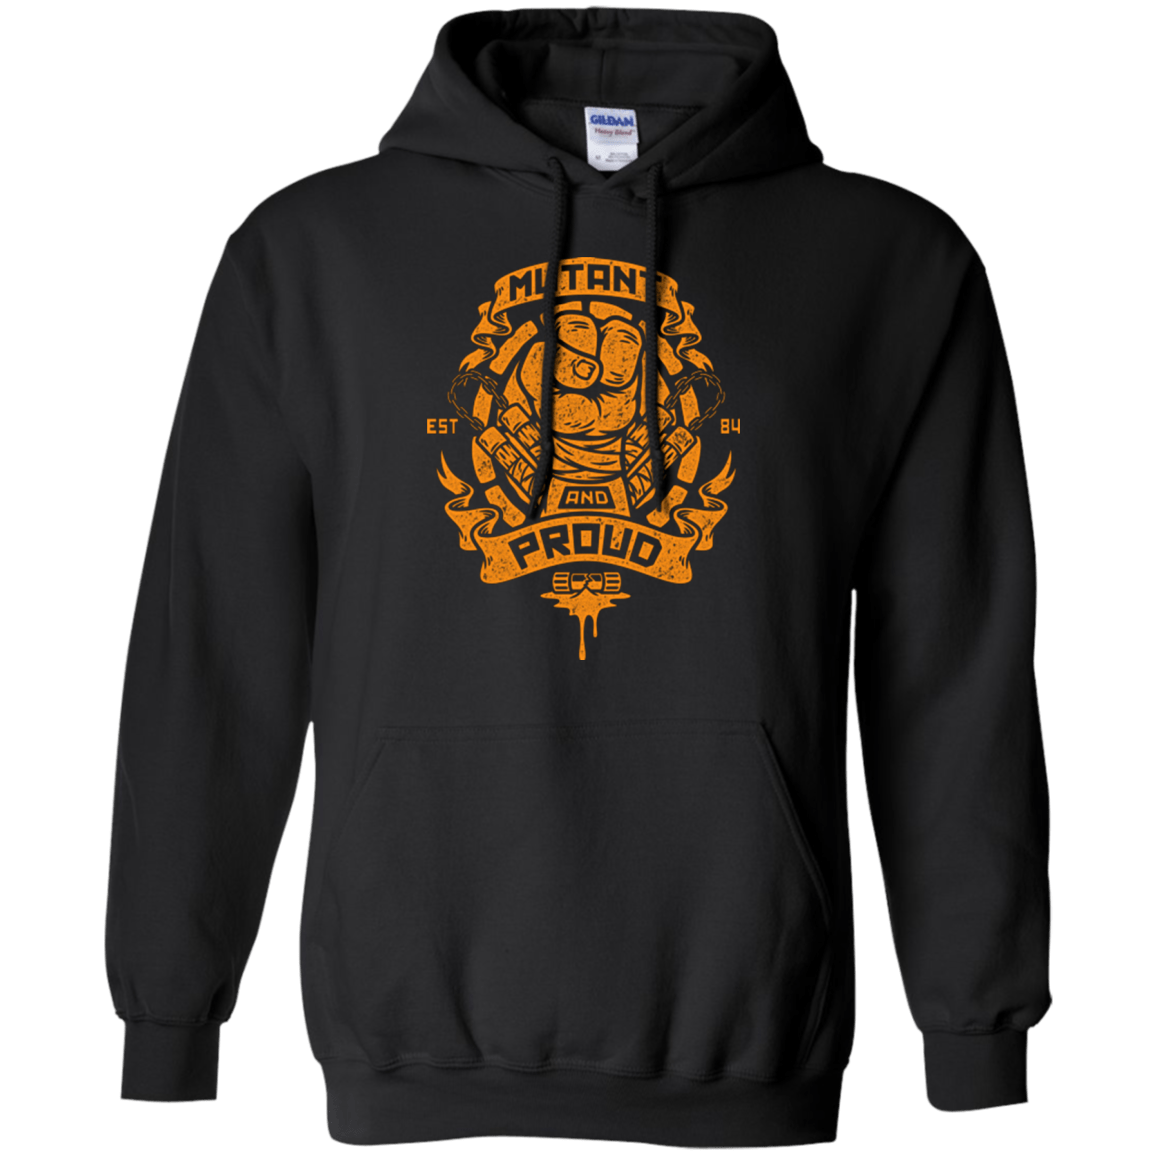 Sweatshirts Black / Small Mutant and Proud Mikey Pullover Hoodie